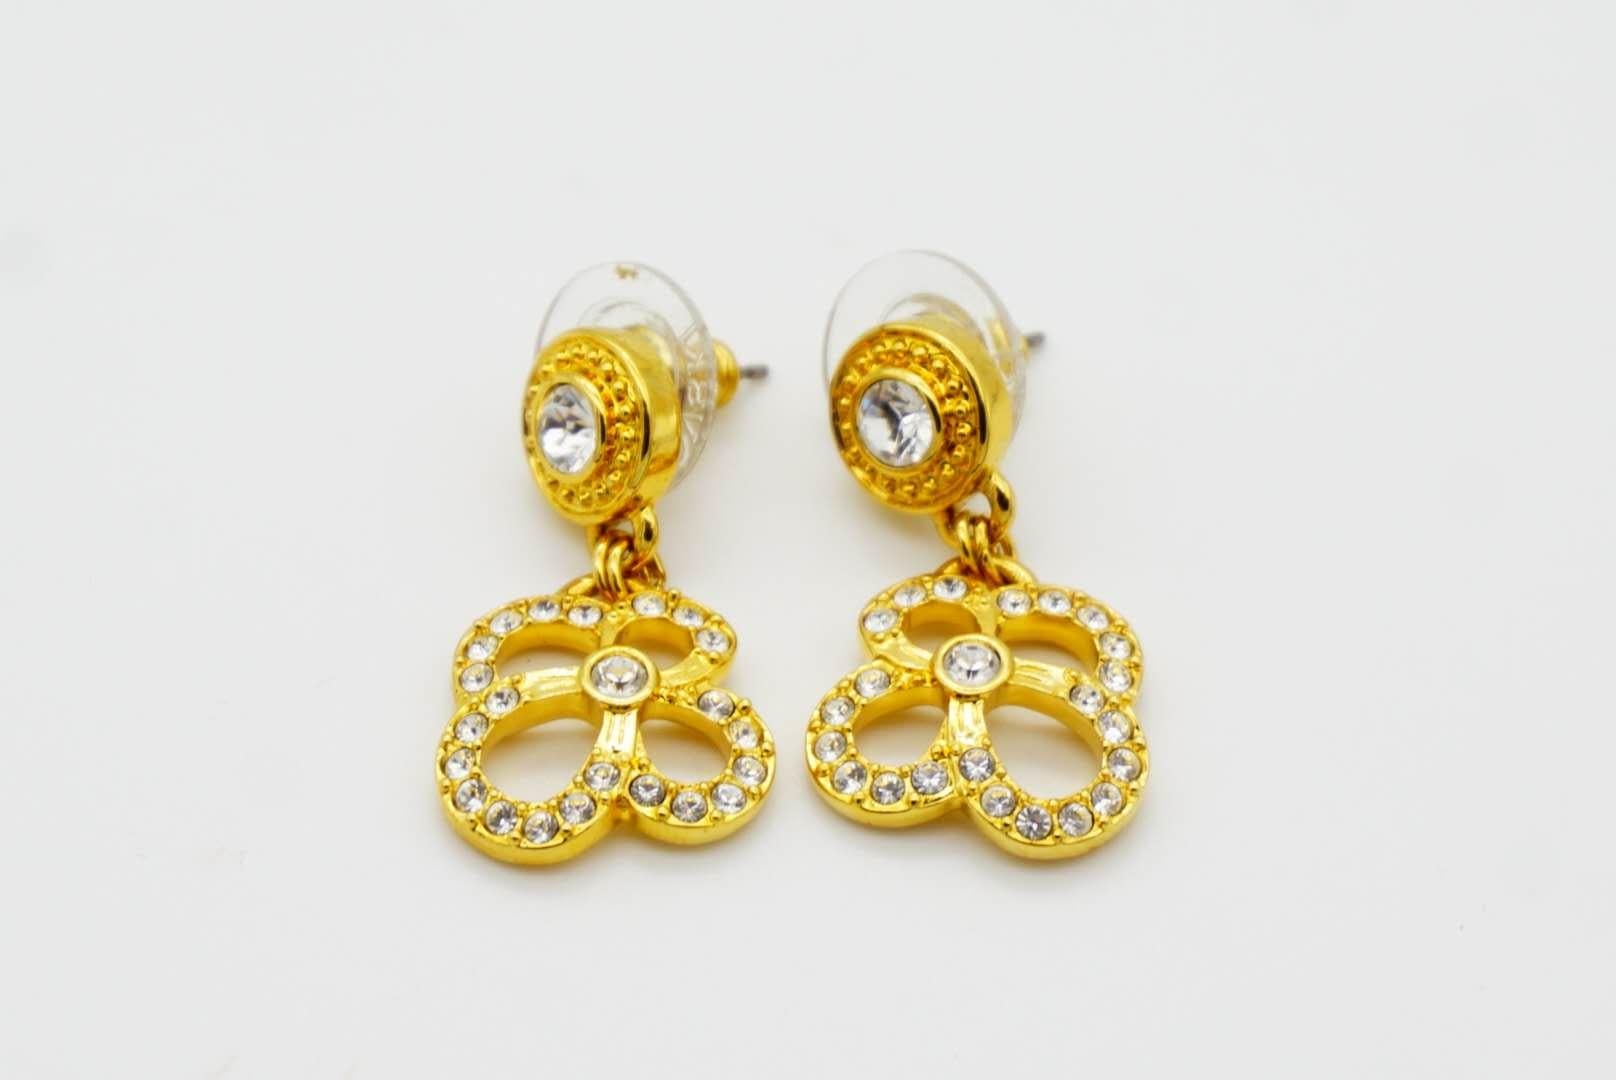 Swarovski Vintage Openwork Floral Crystals Dangle Pierced Earrings, Yellow Gold For Sale 5